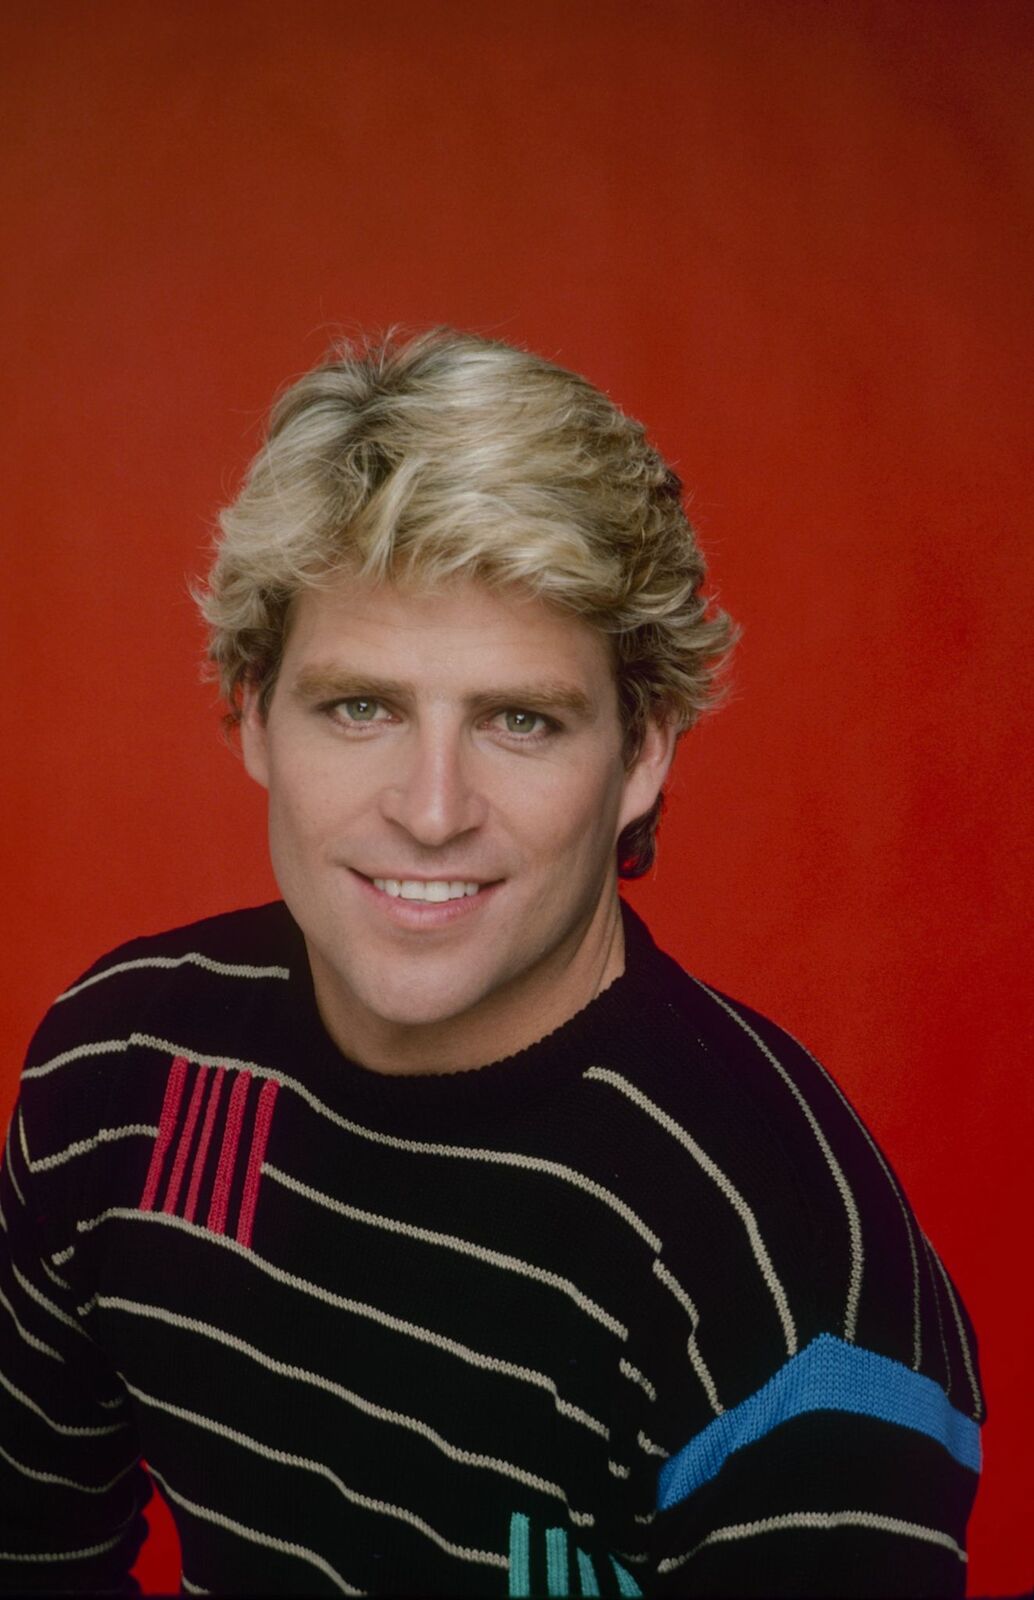 Ted McGinley on the set of "The Love Boat" in 1984 | Source: Getty Images